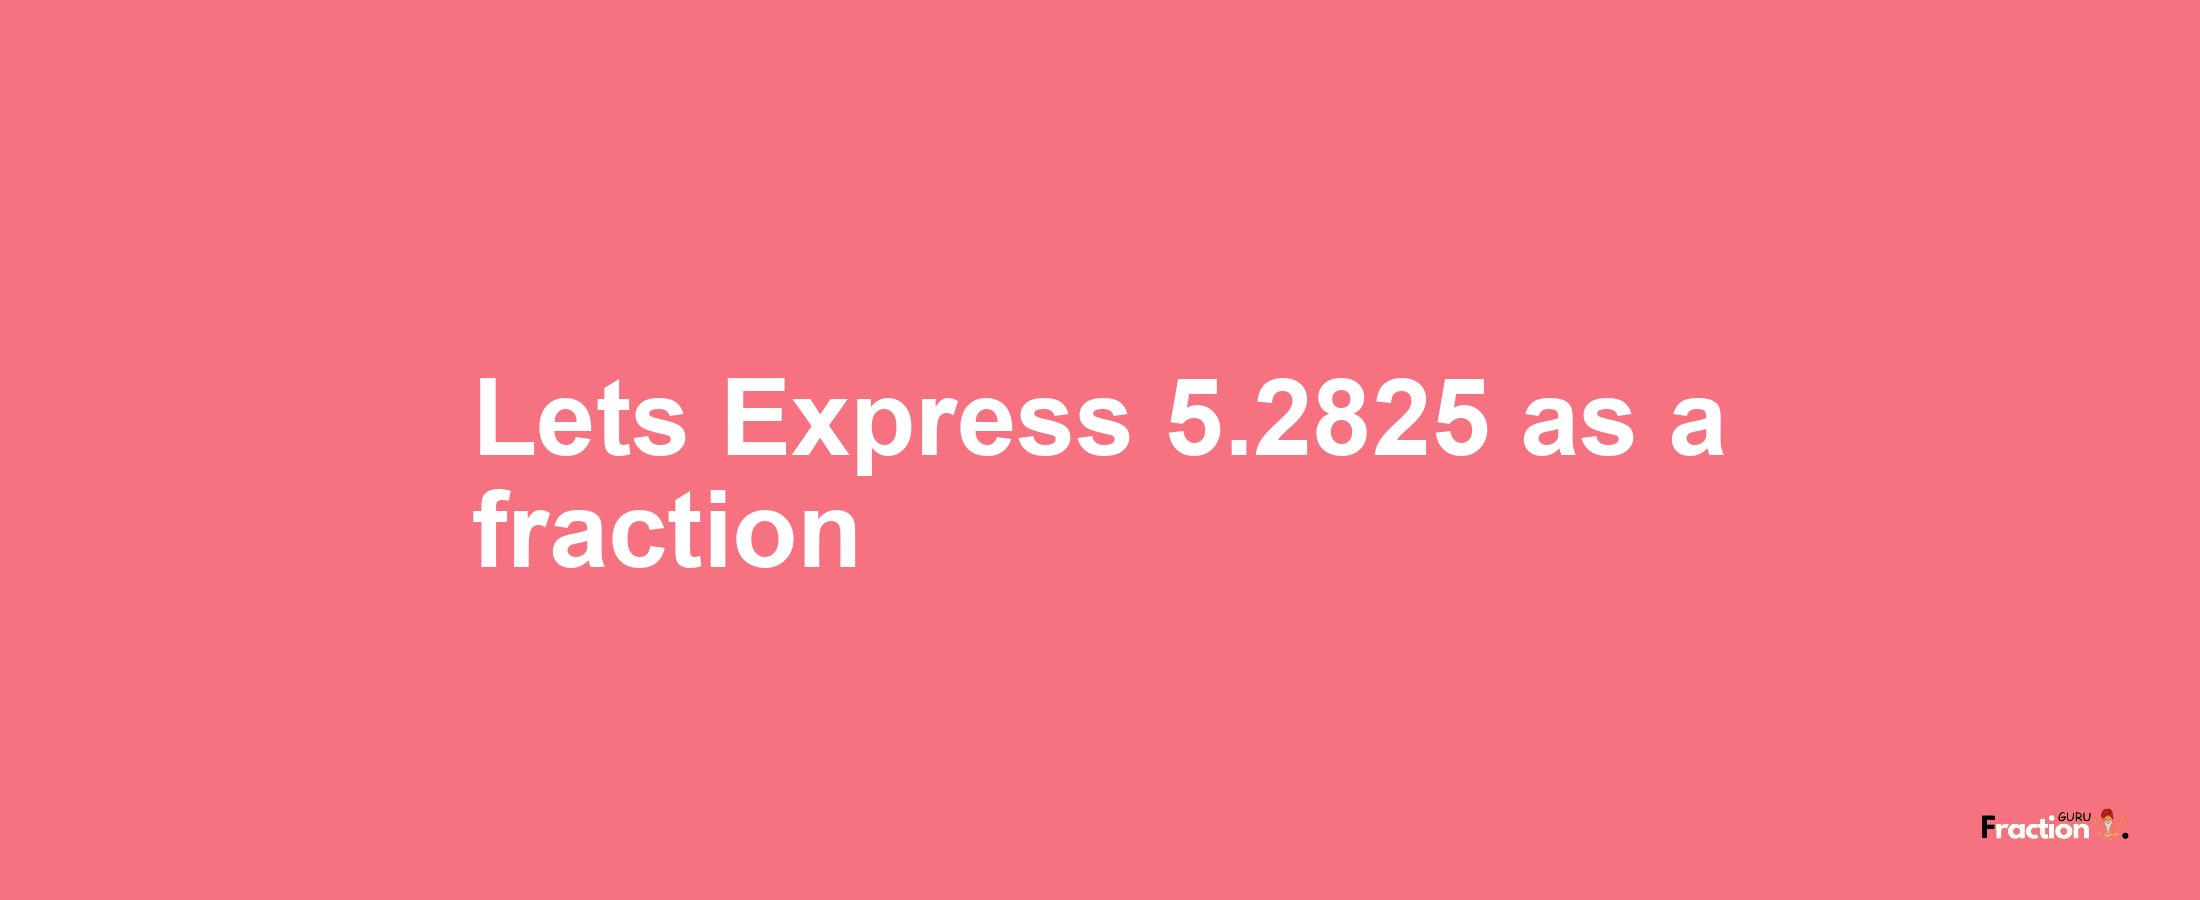 Lets Express 5.2825 as afraction